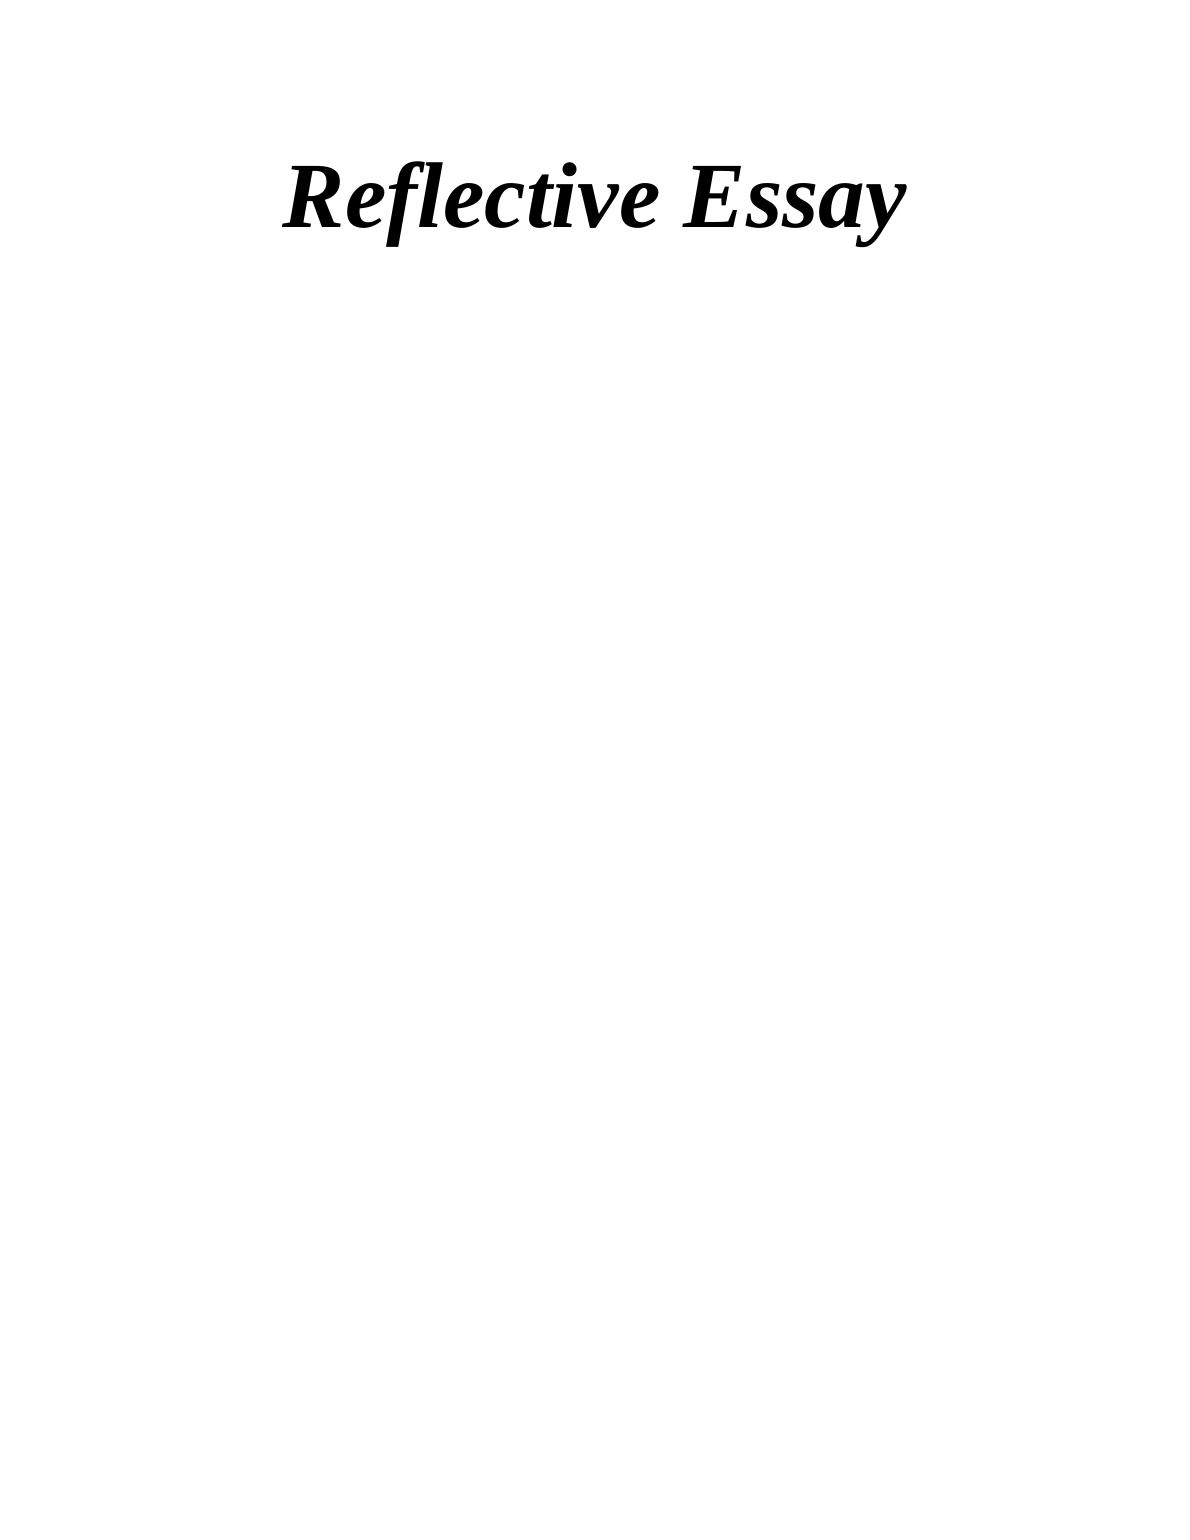 Personal and Professional Life: Essay_1